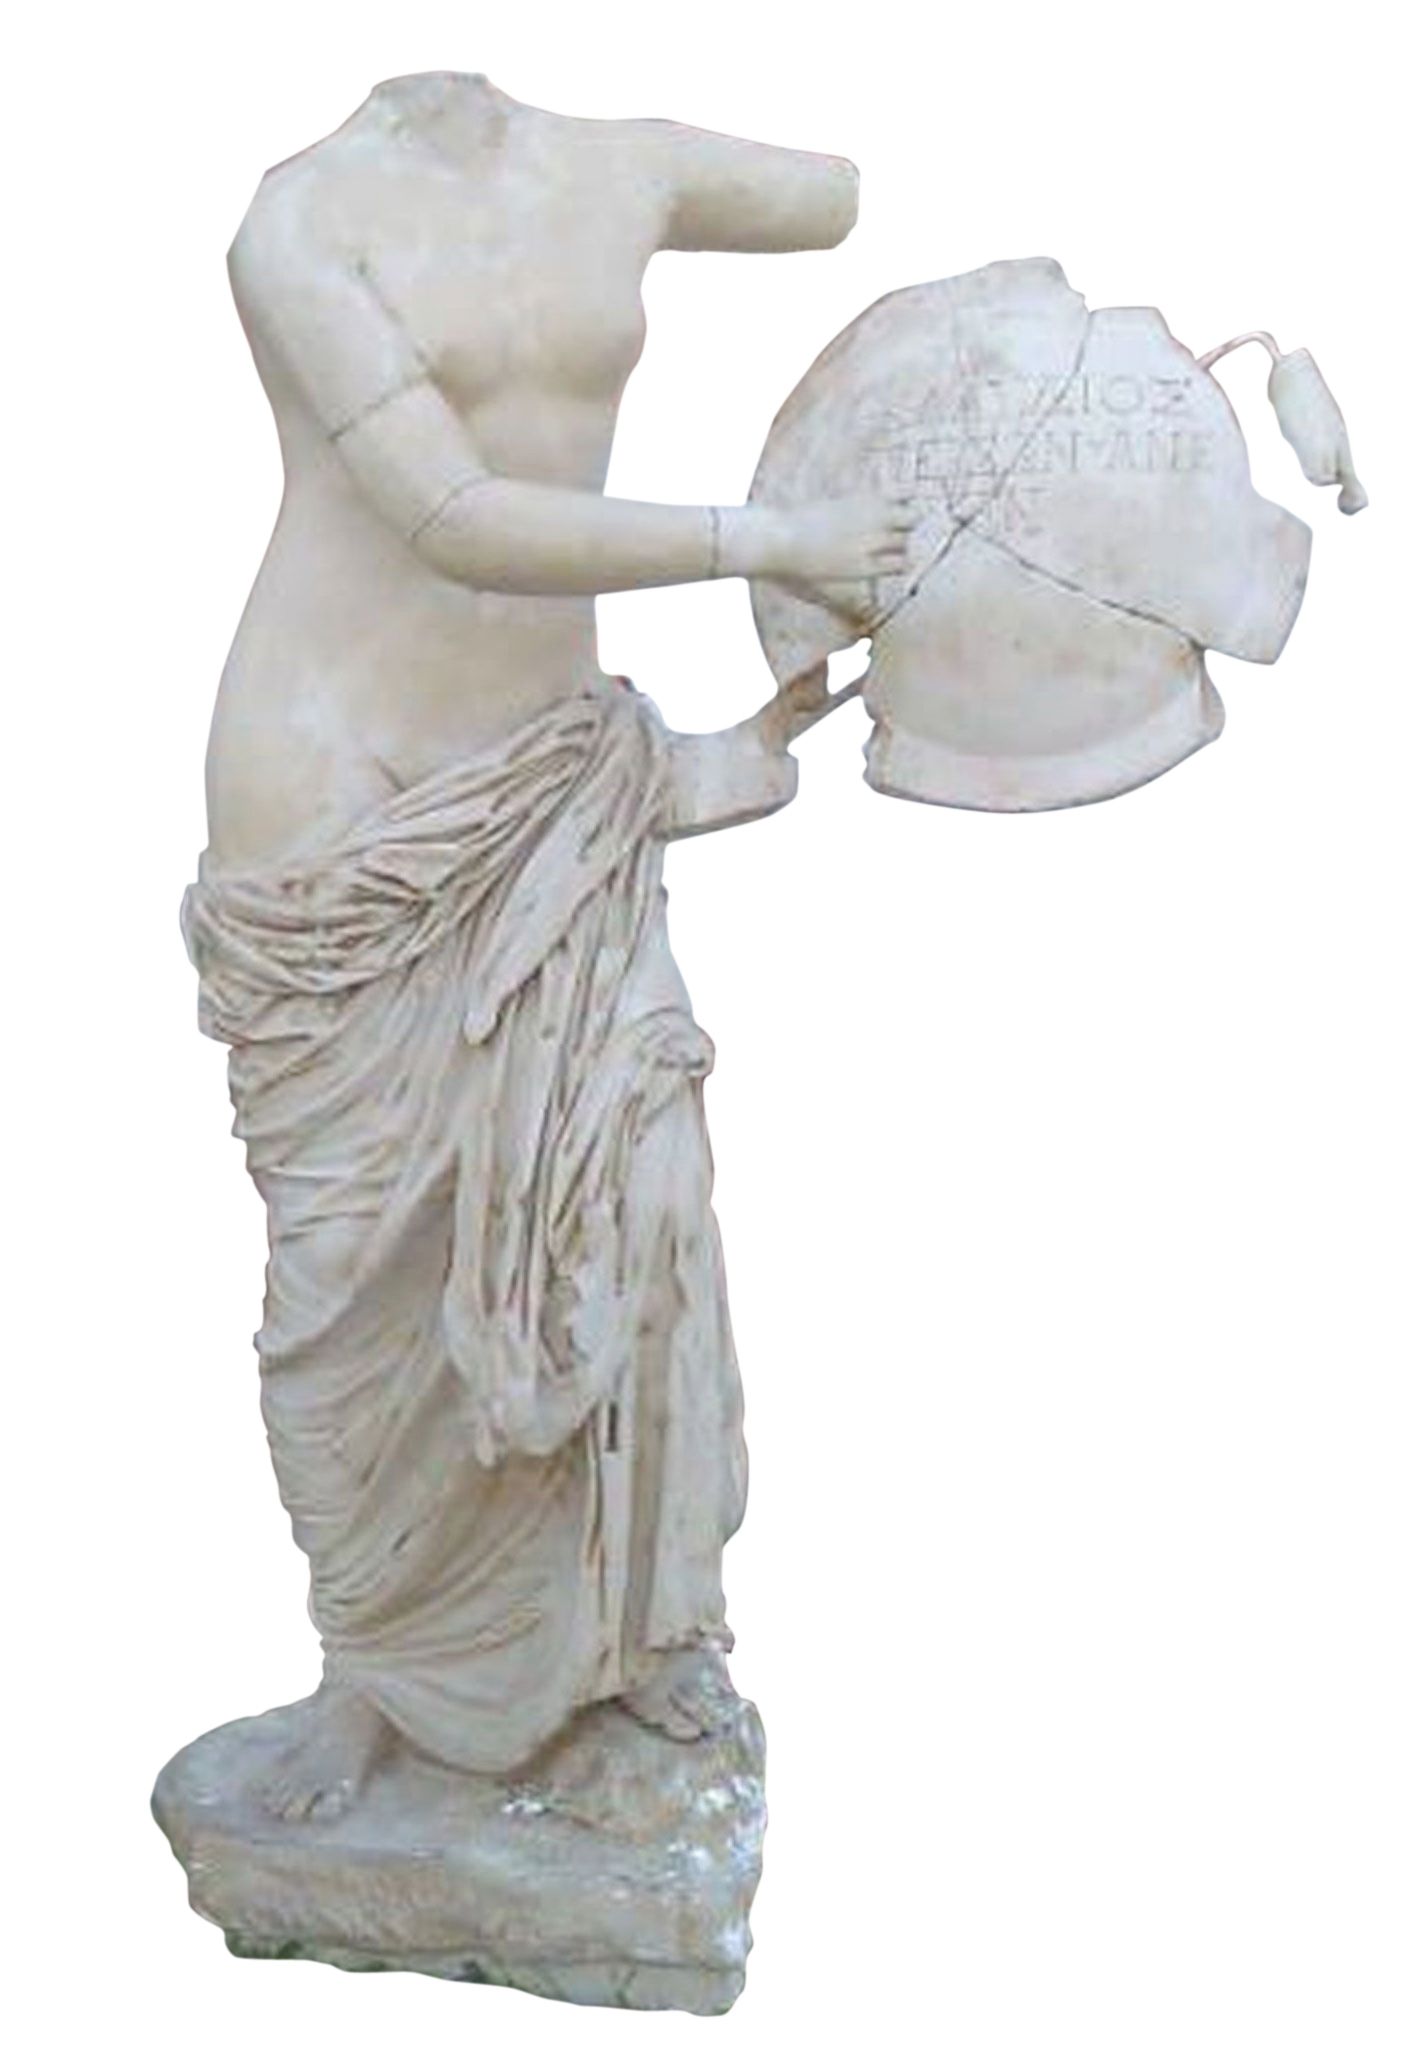 Statue of Aphrodite from Perge